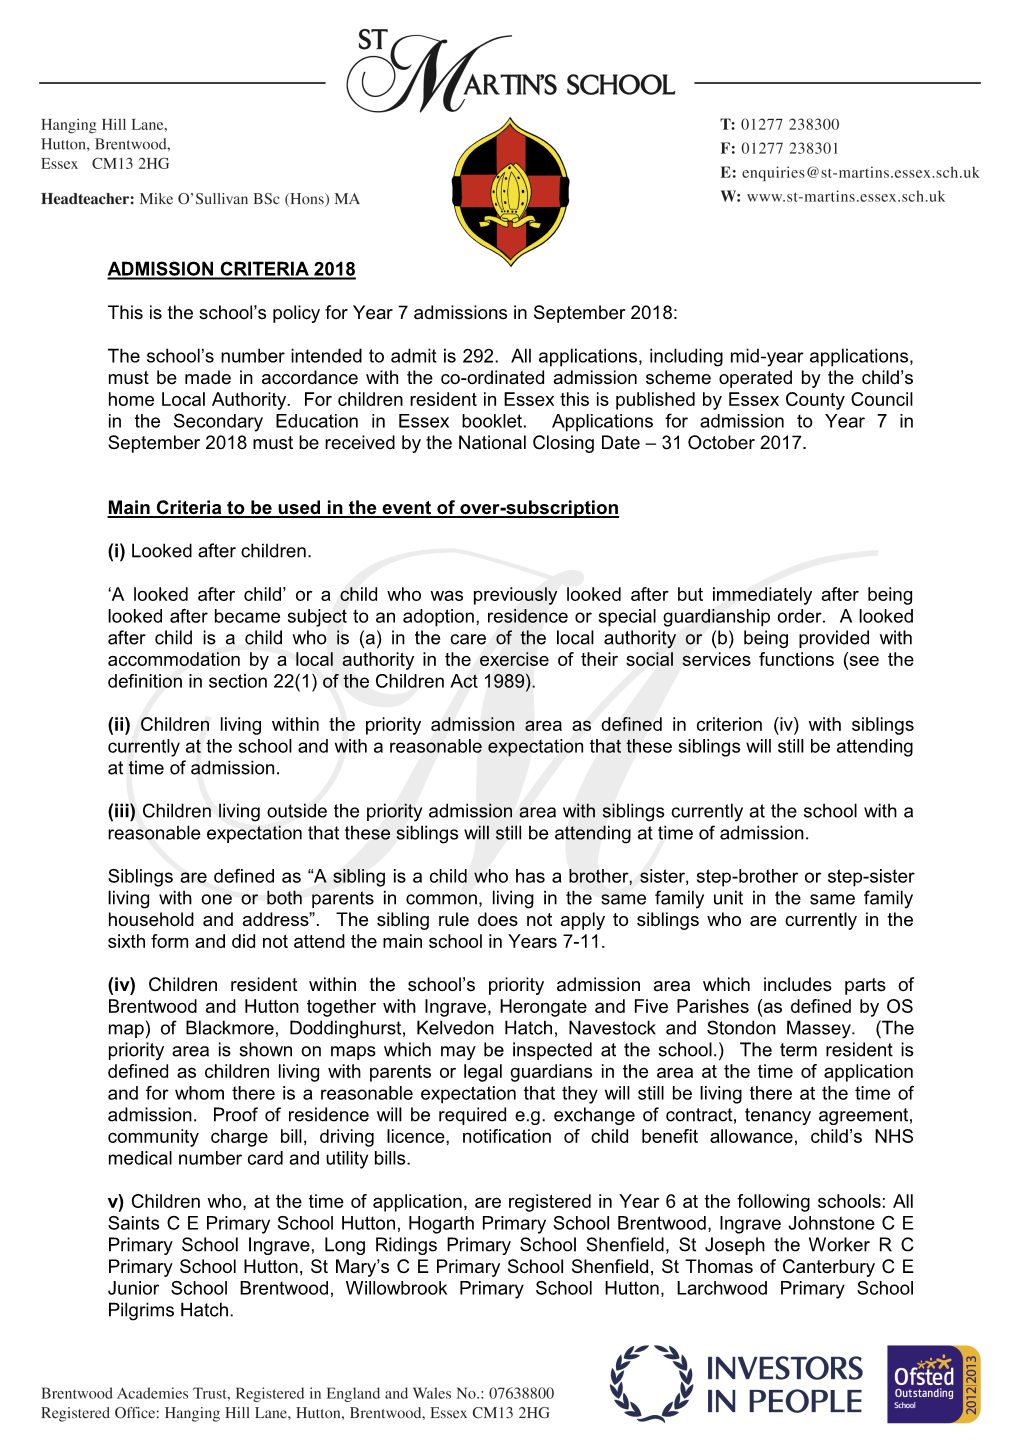 ADMISSION CRITERIA 2018 This Is the School's